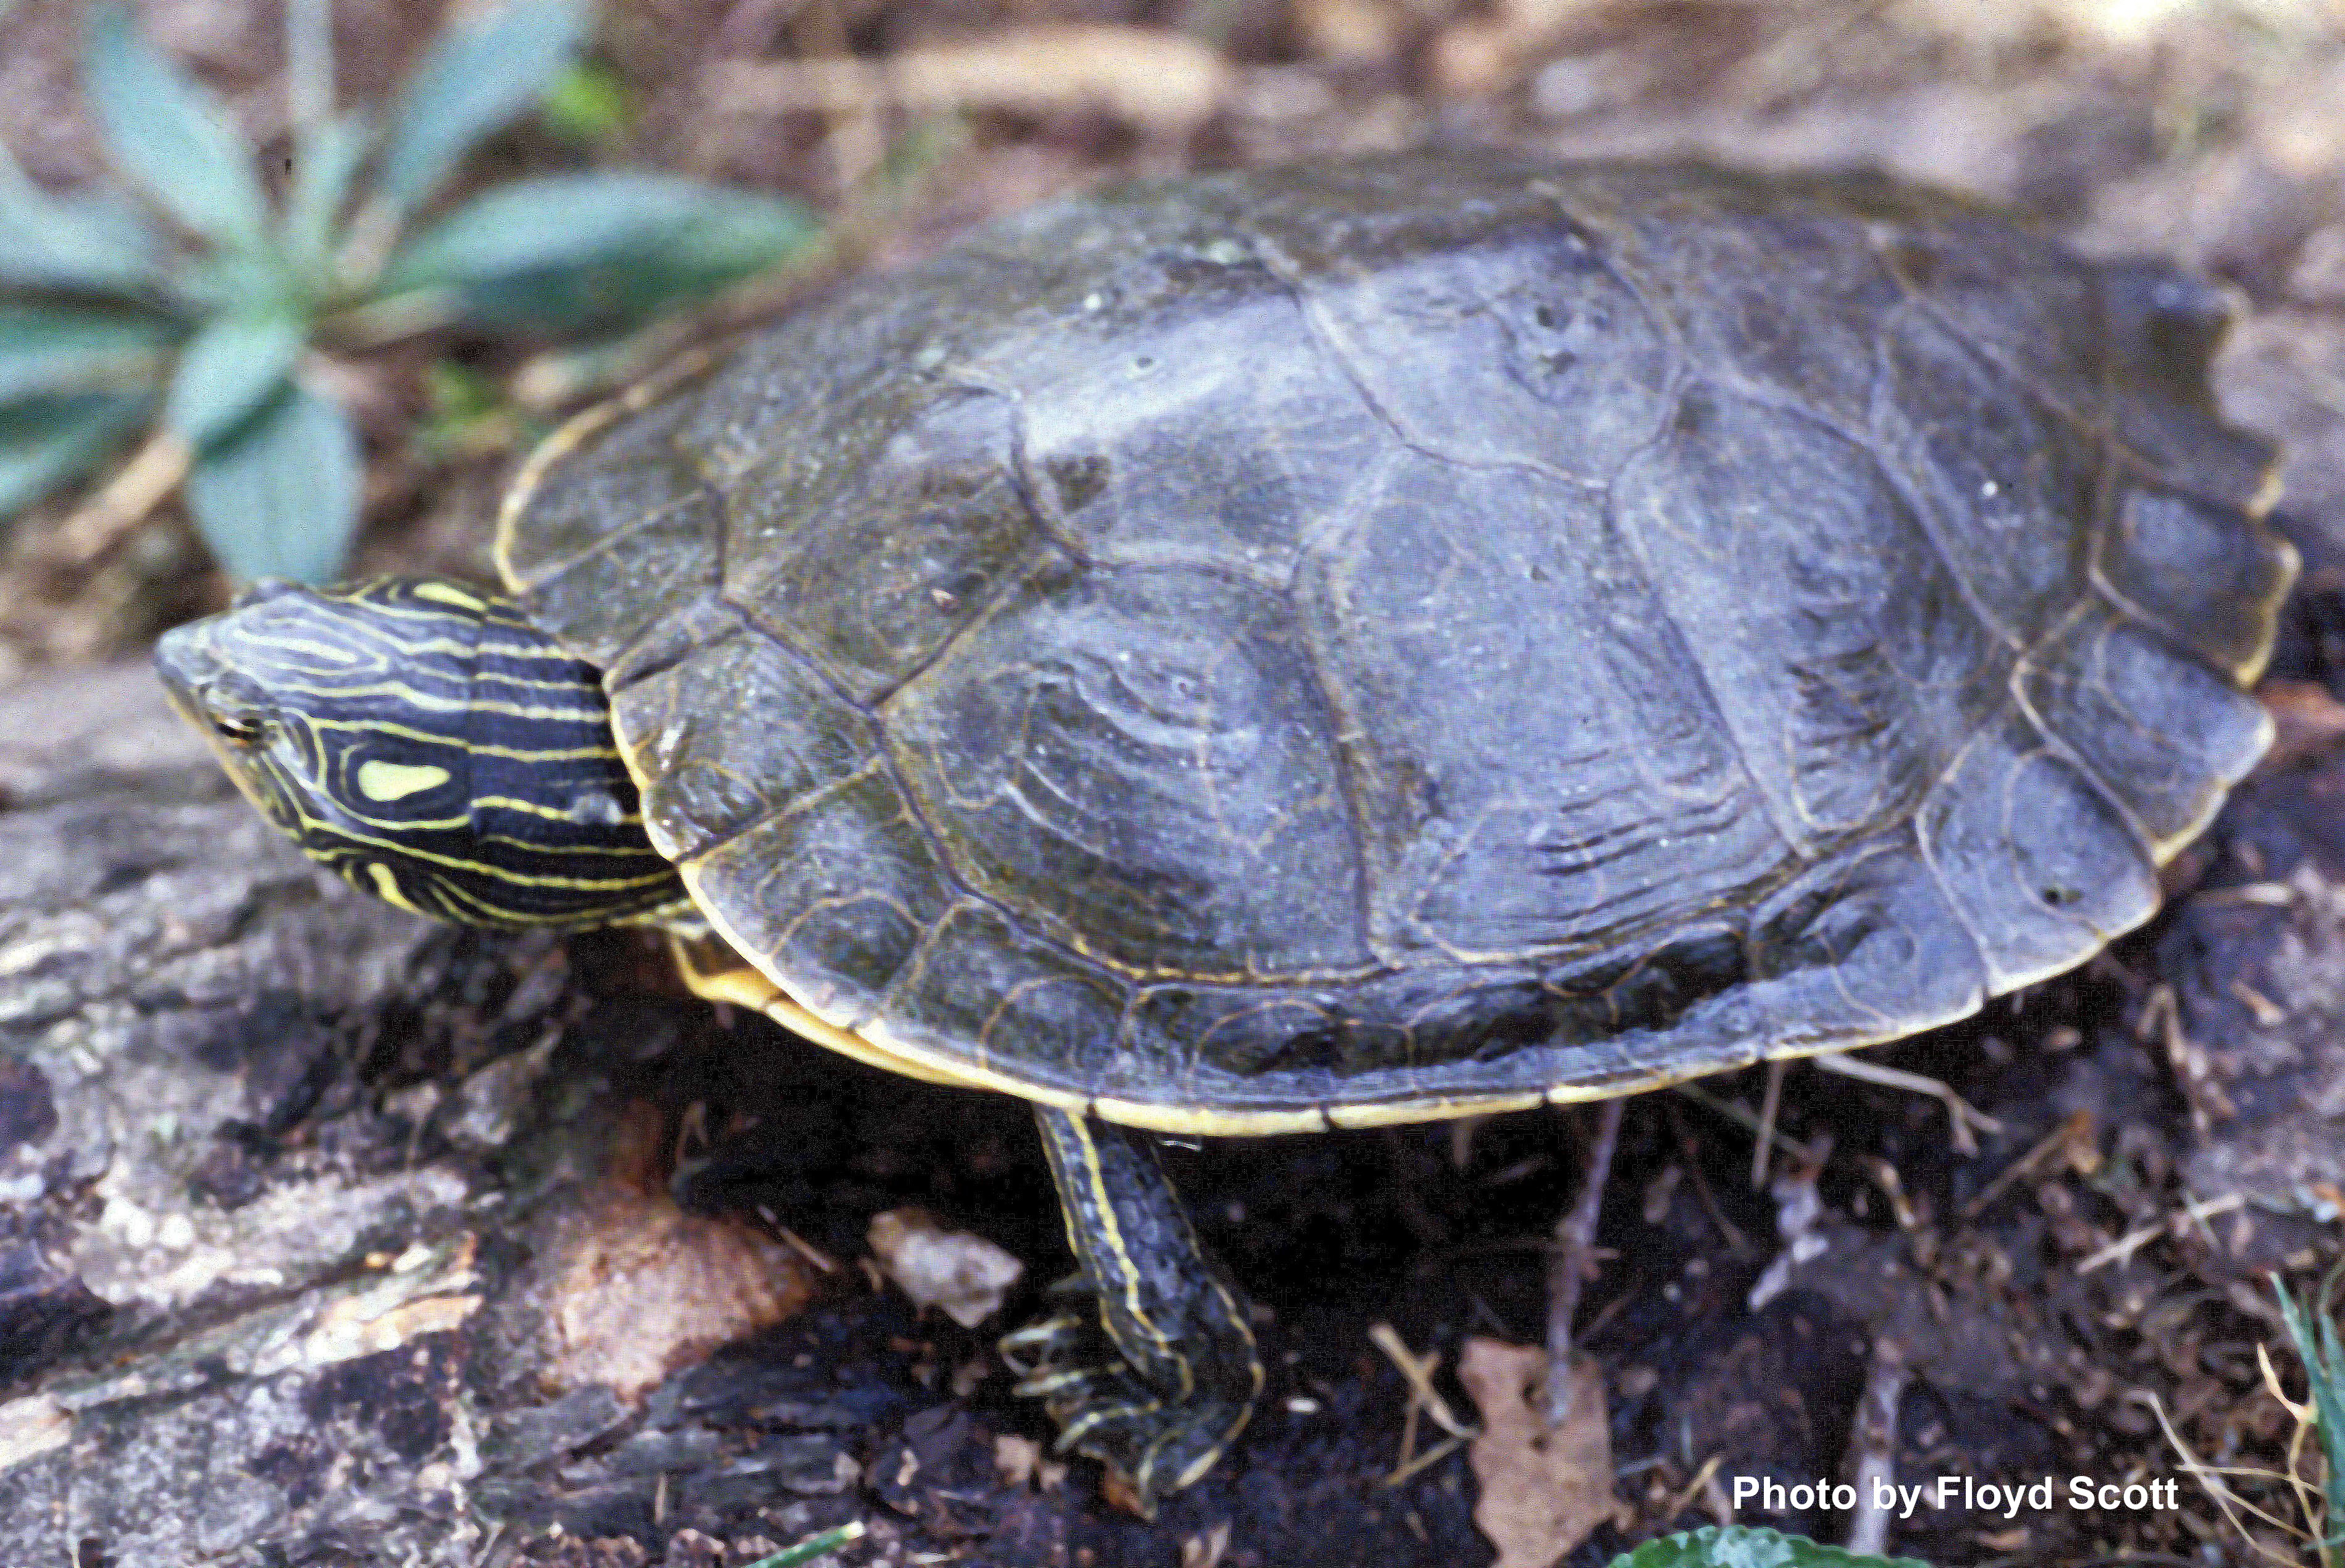 Graptemys geographica (LeSueur) – Northern Map Turtle